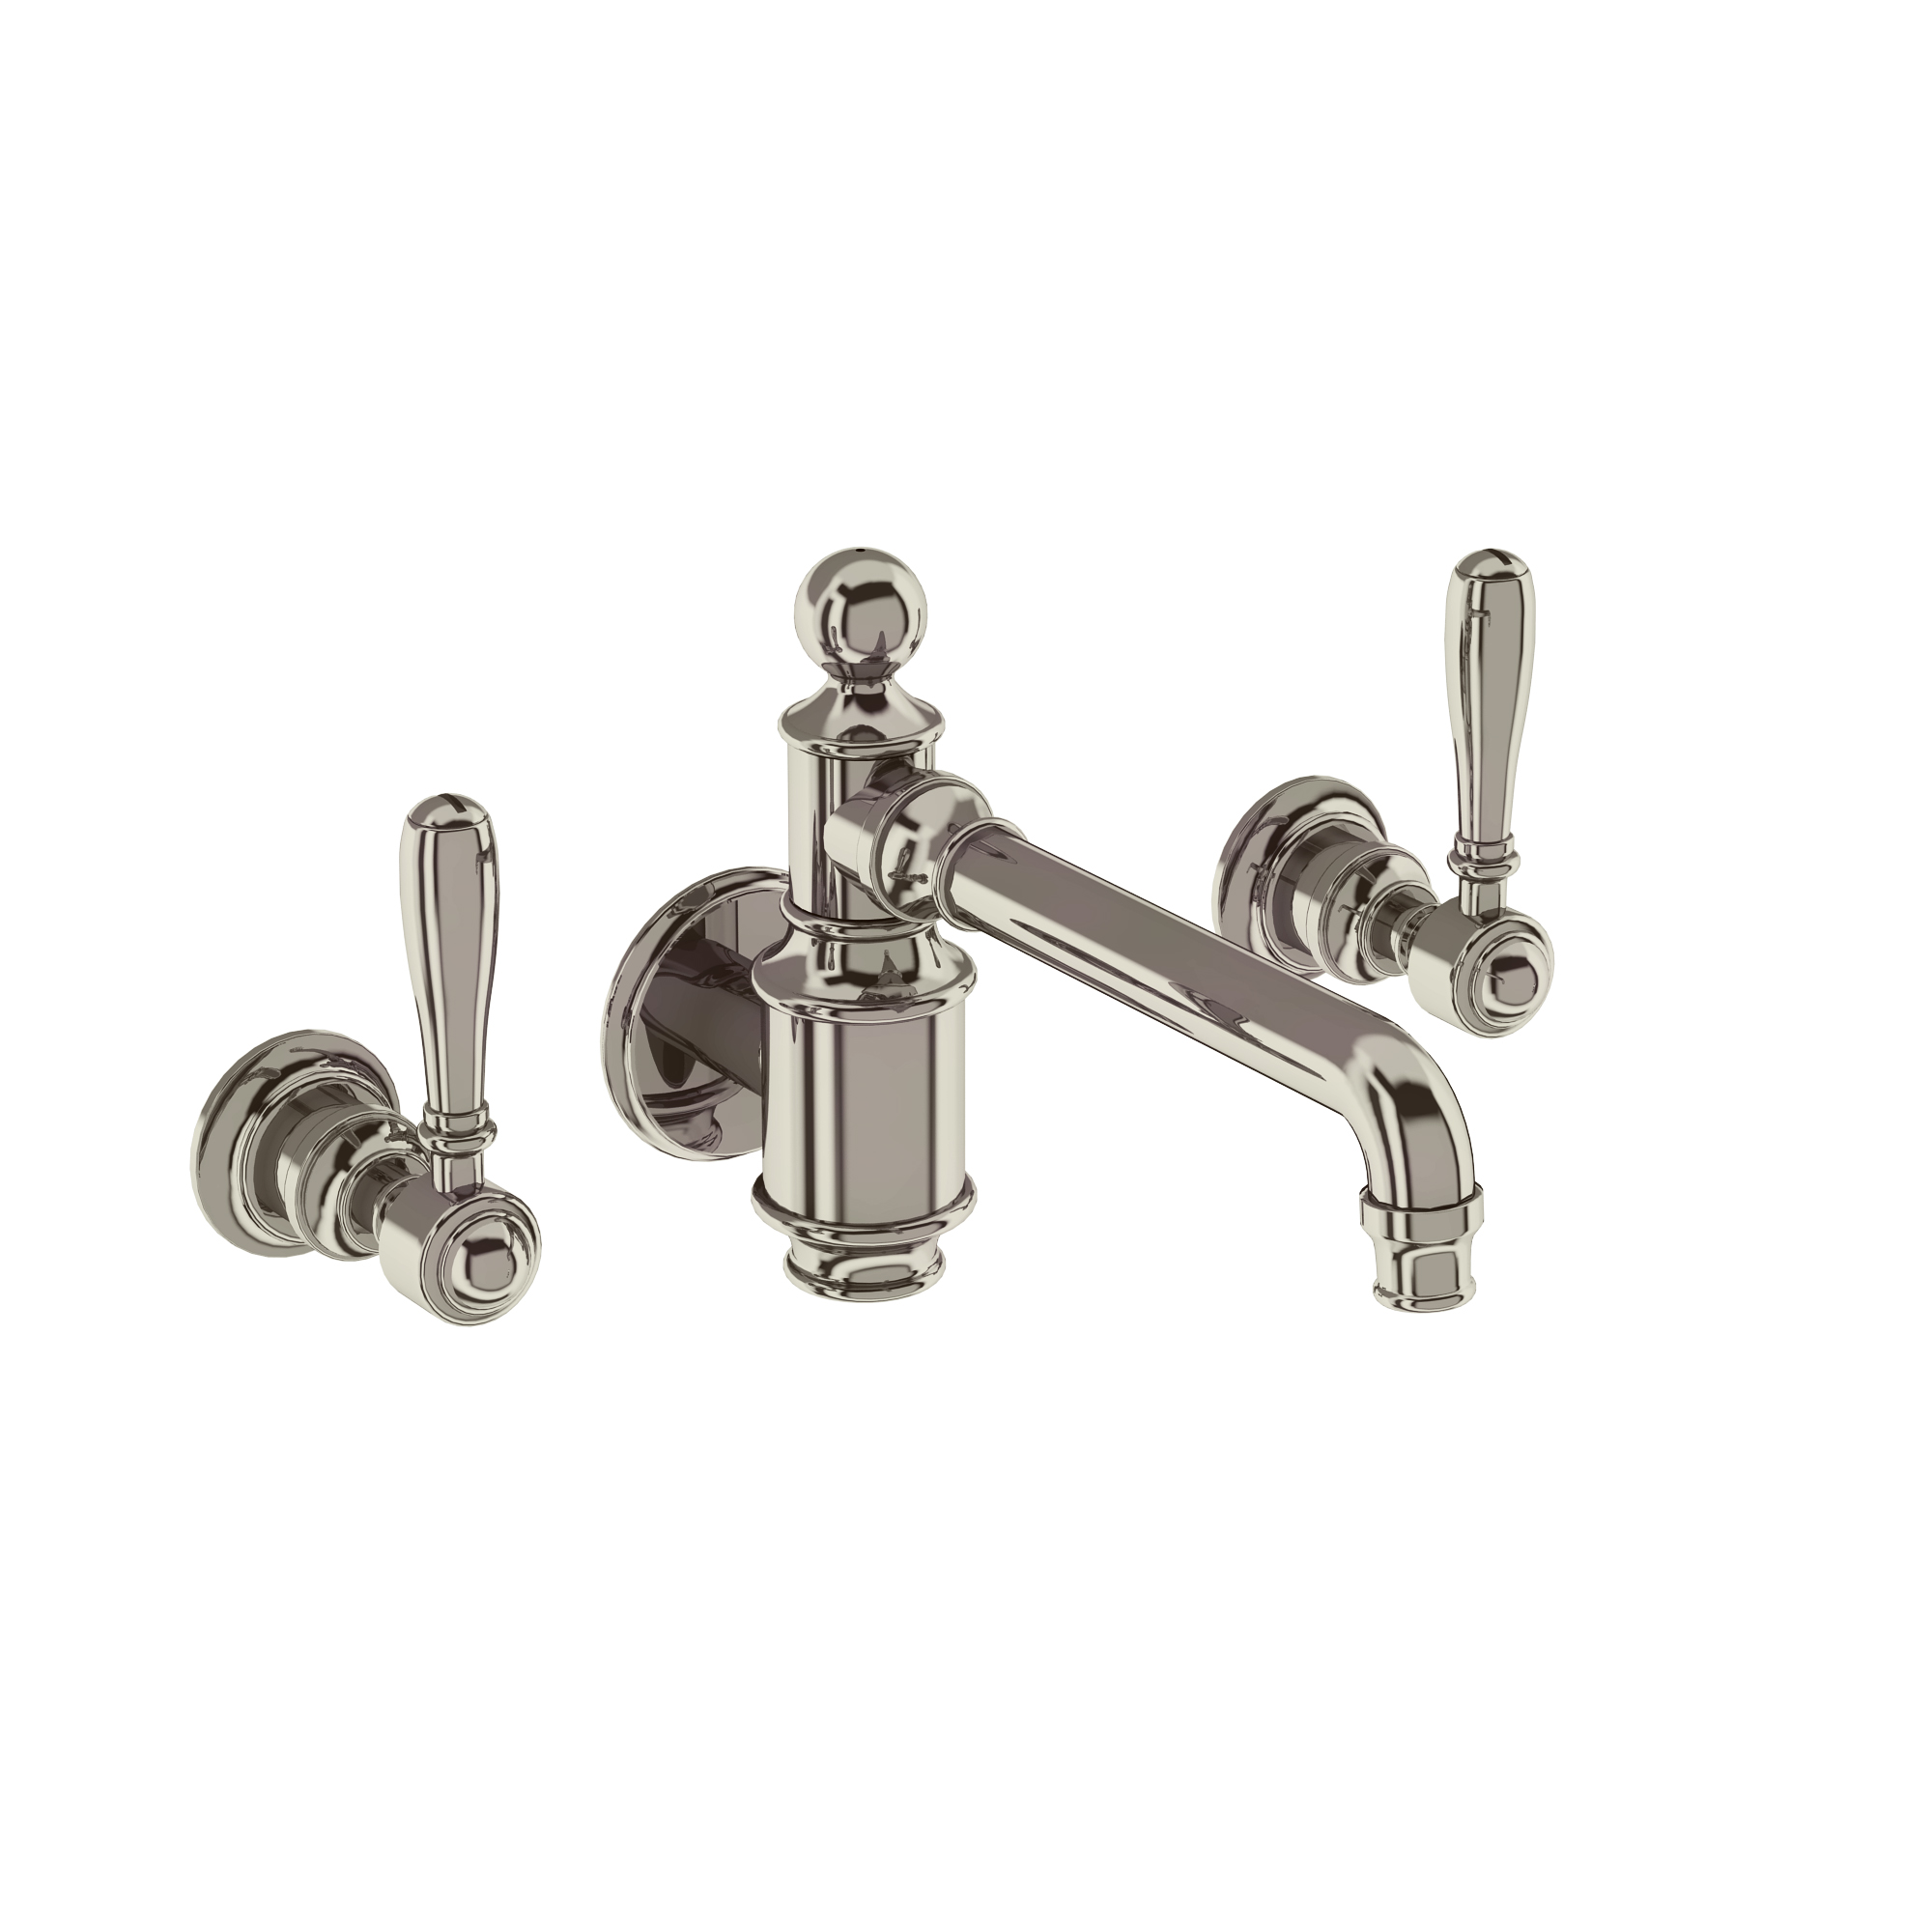 Arcade Three hole basin mixer wall-mounted without pop up waste - nickel - with brass lever